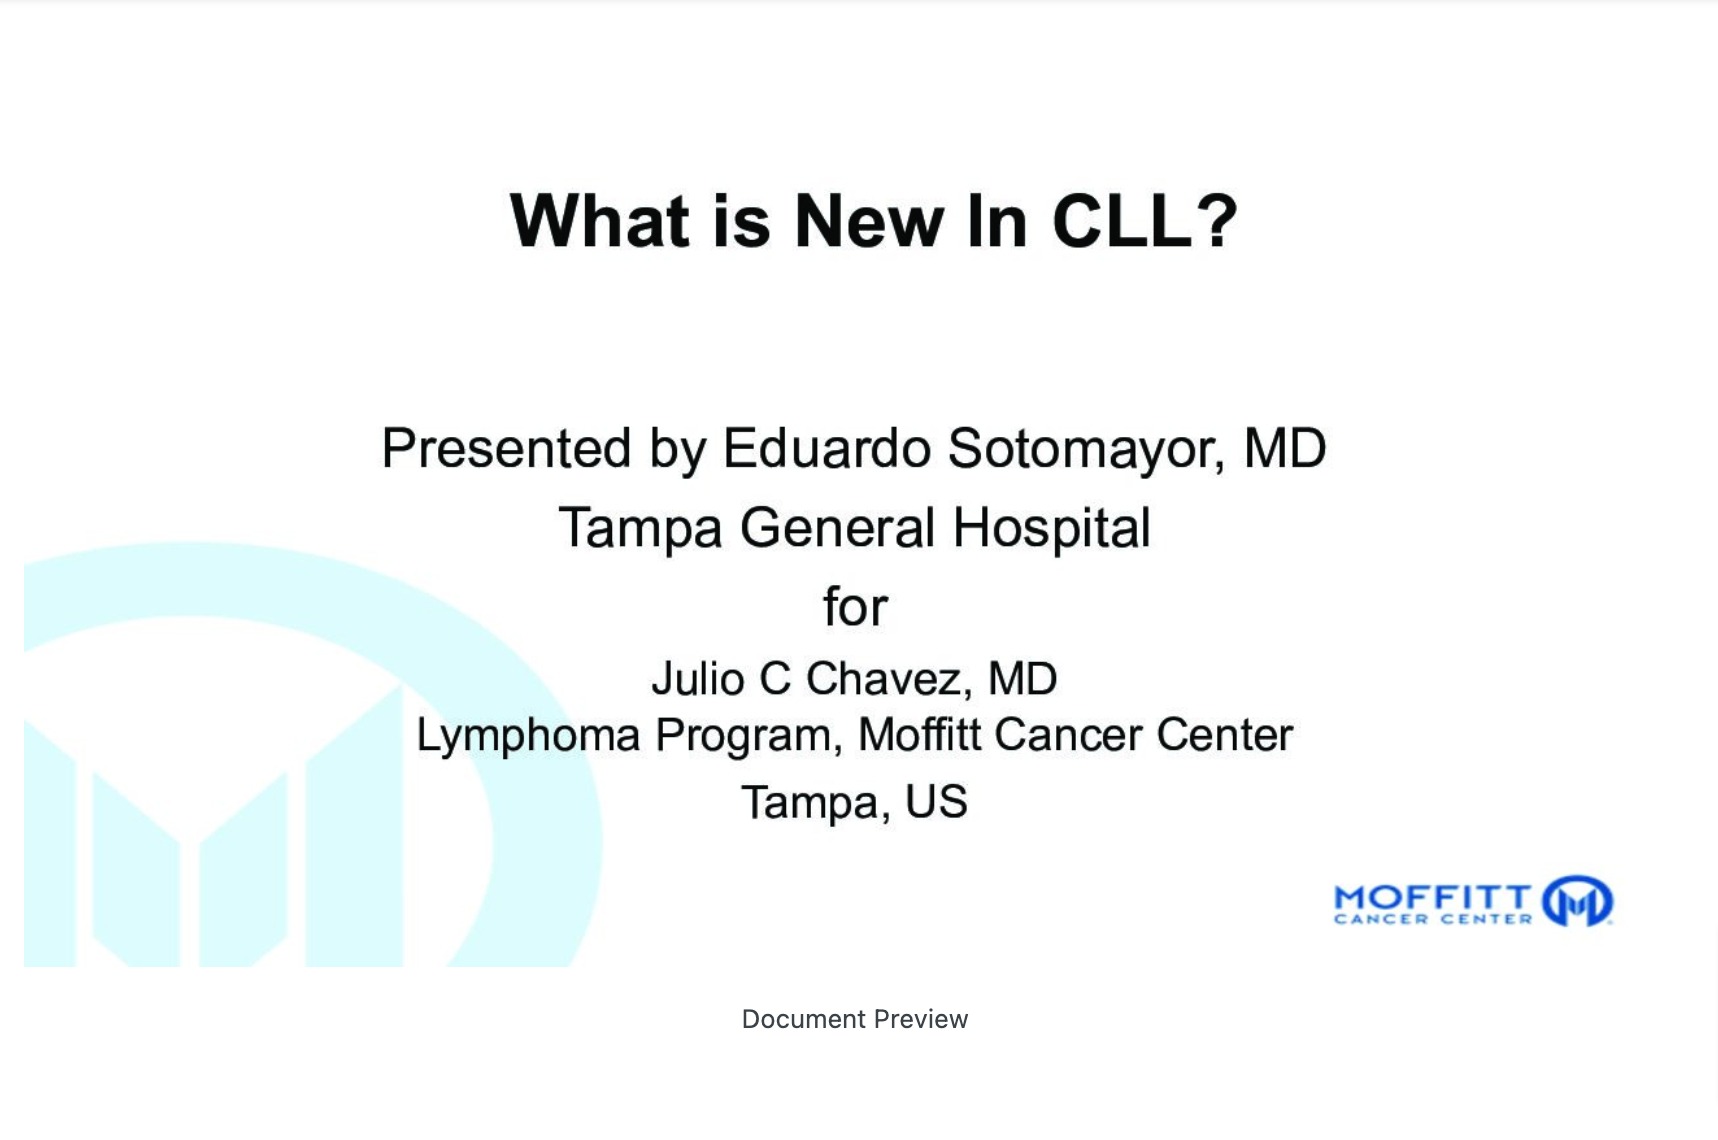 New Developments in CLL